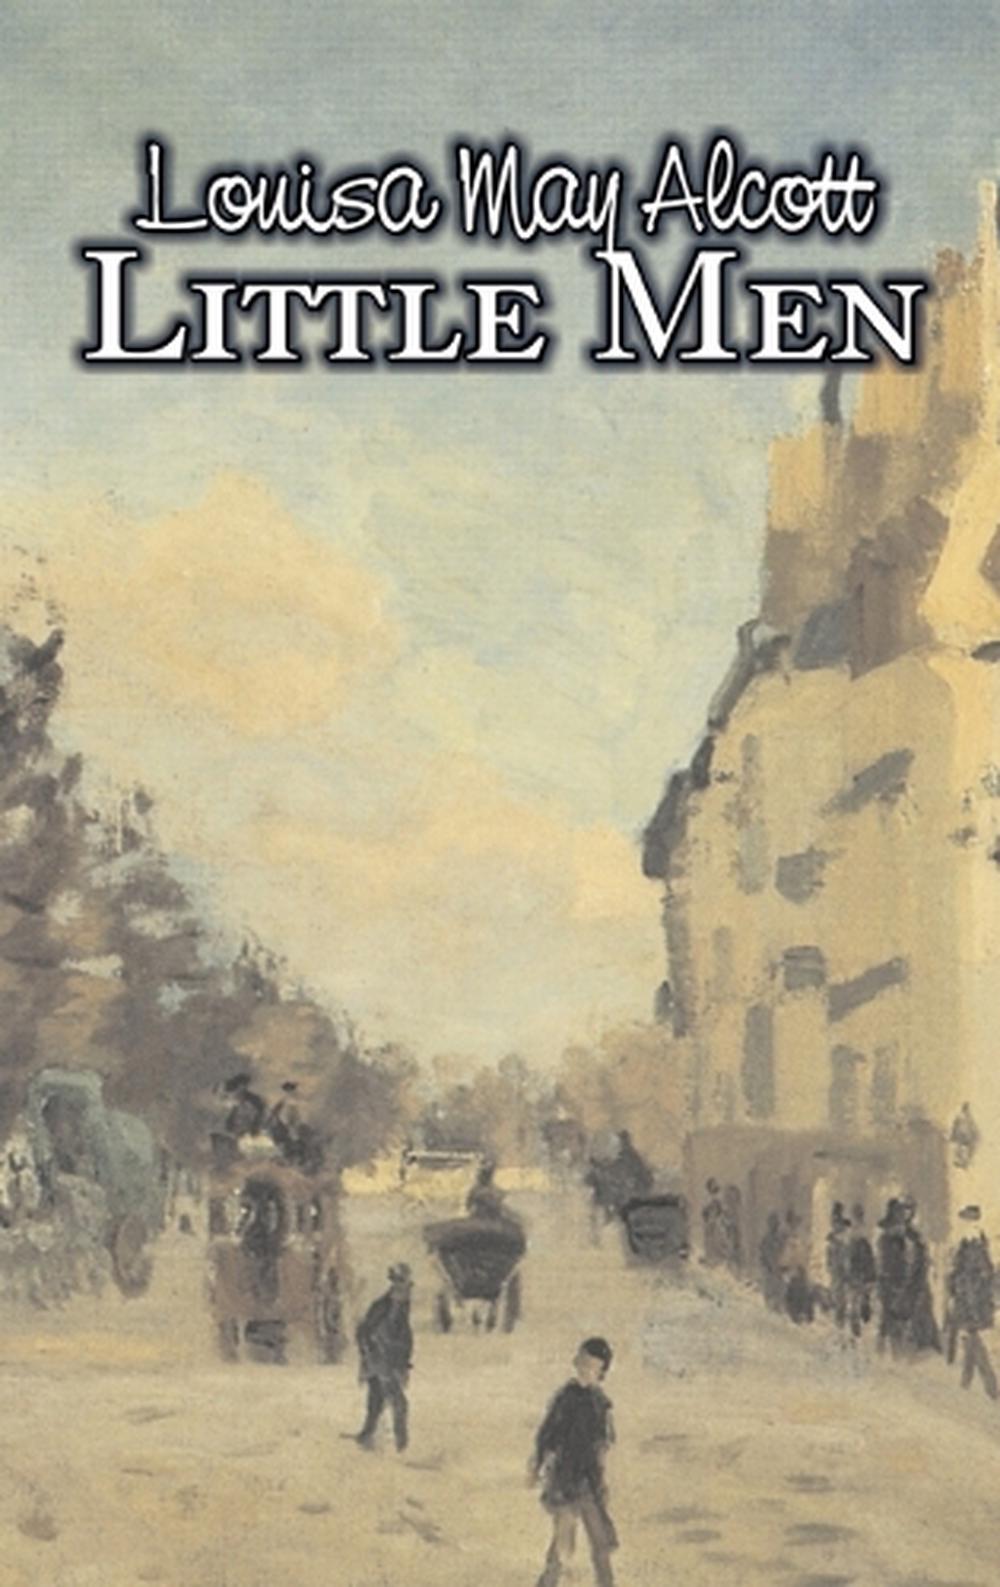 Little Men by Louisa May Alcott (English) Hardcover Book Free Shipping! 9781606647622 | eBay